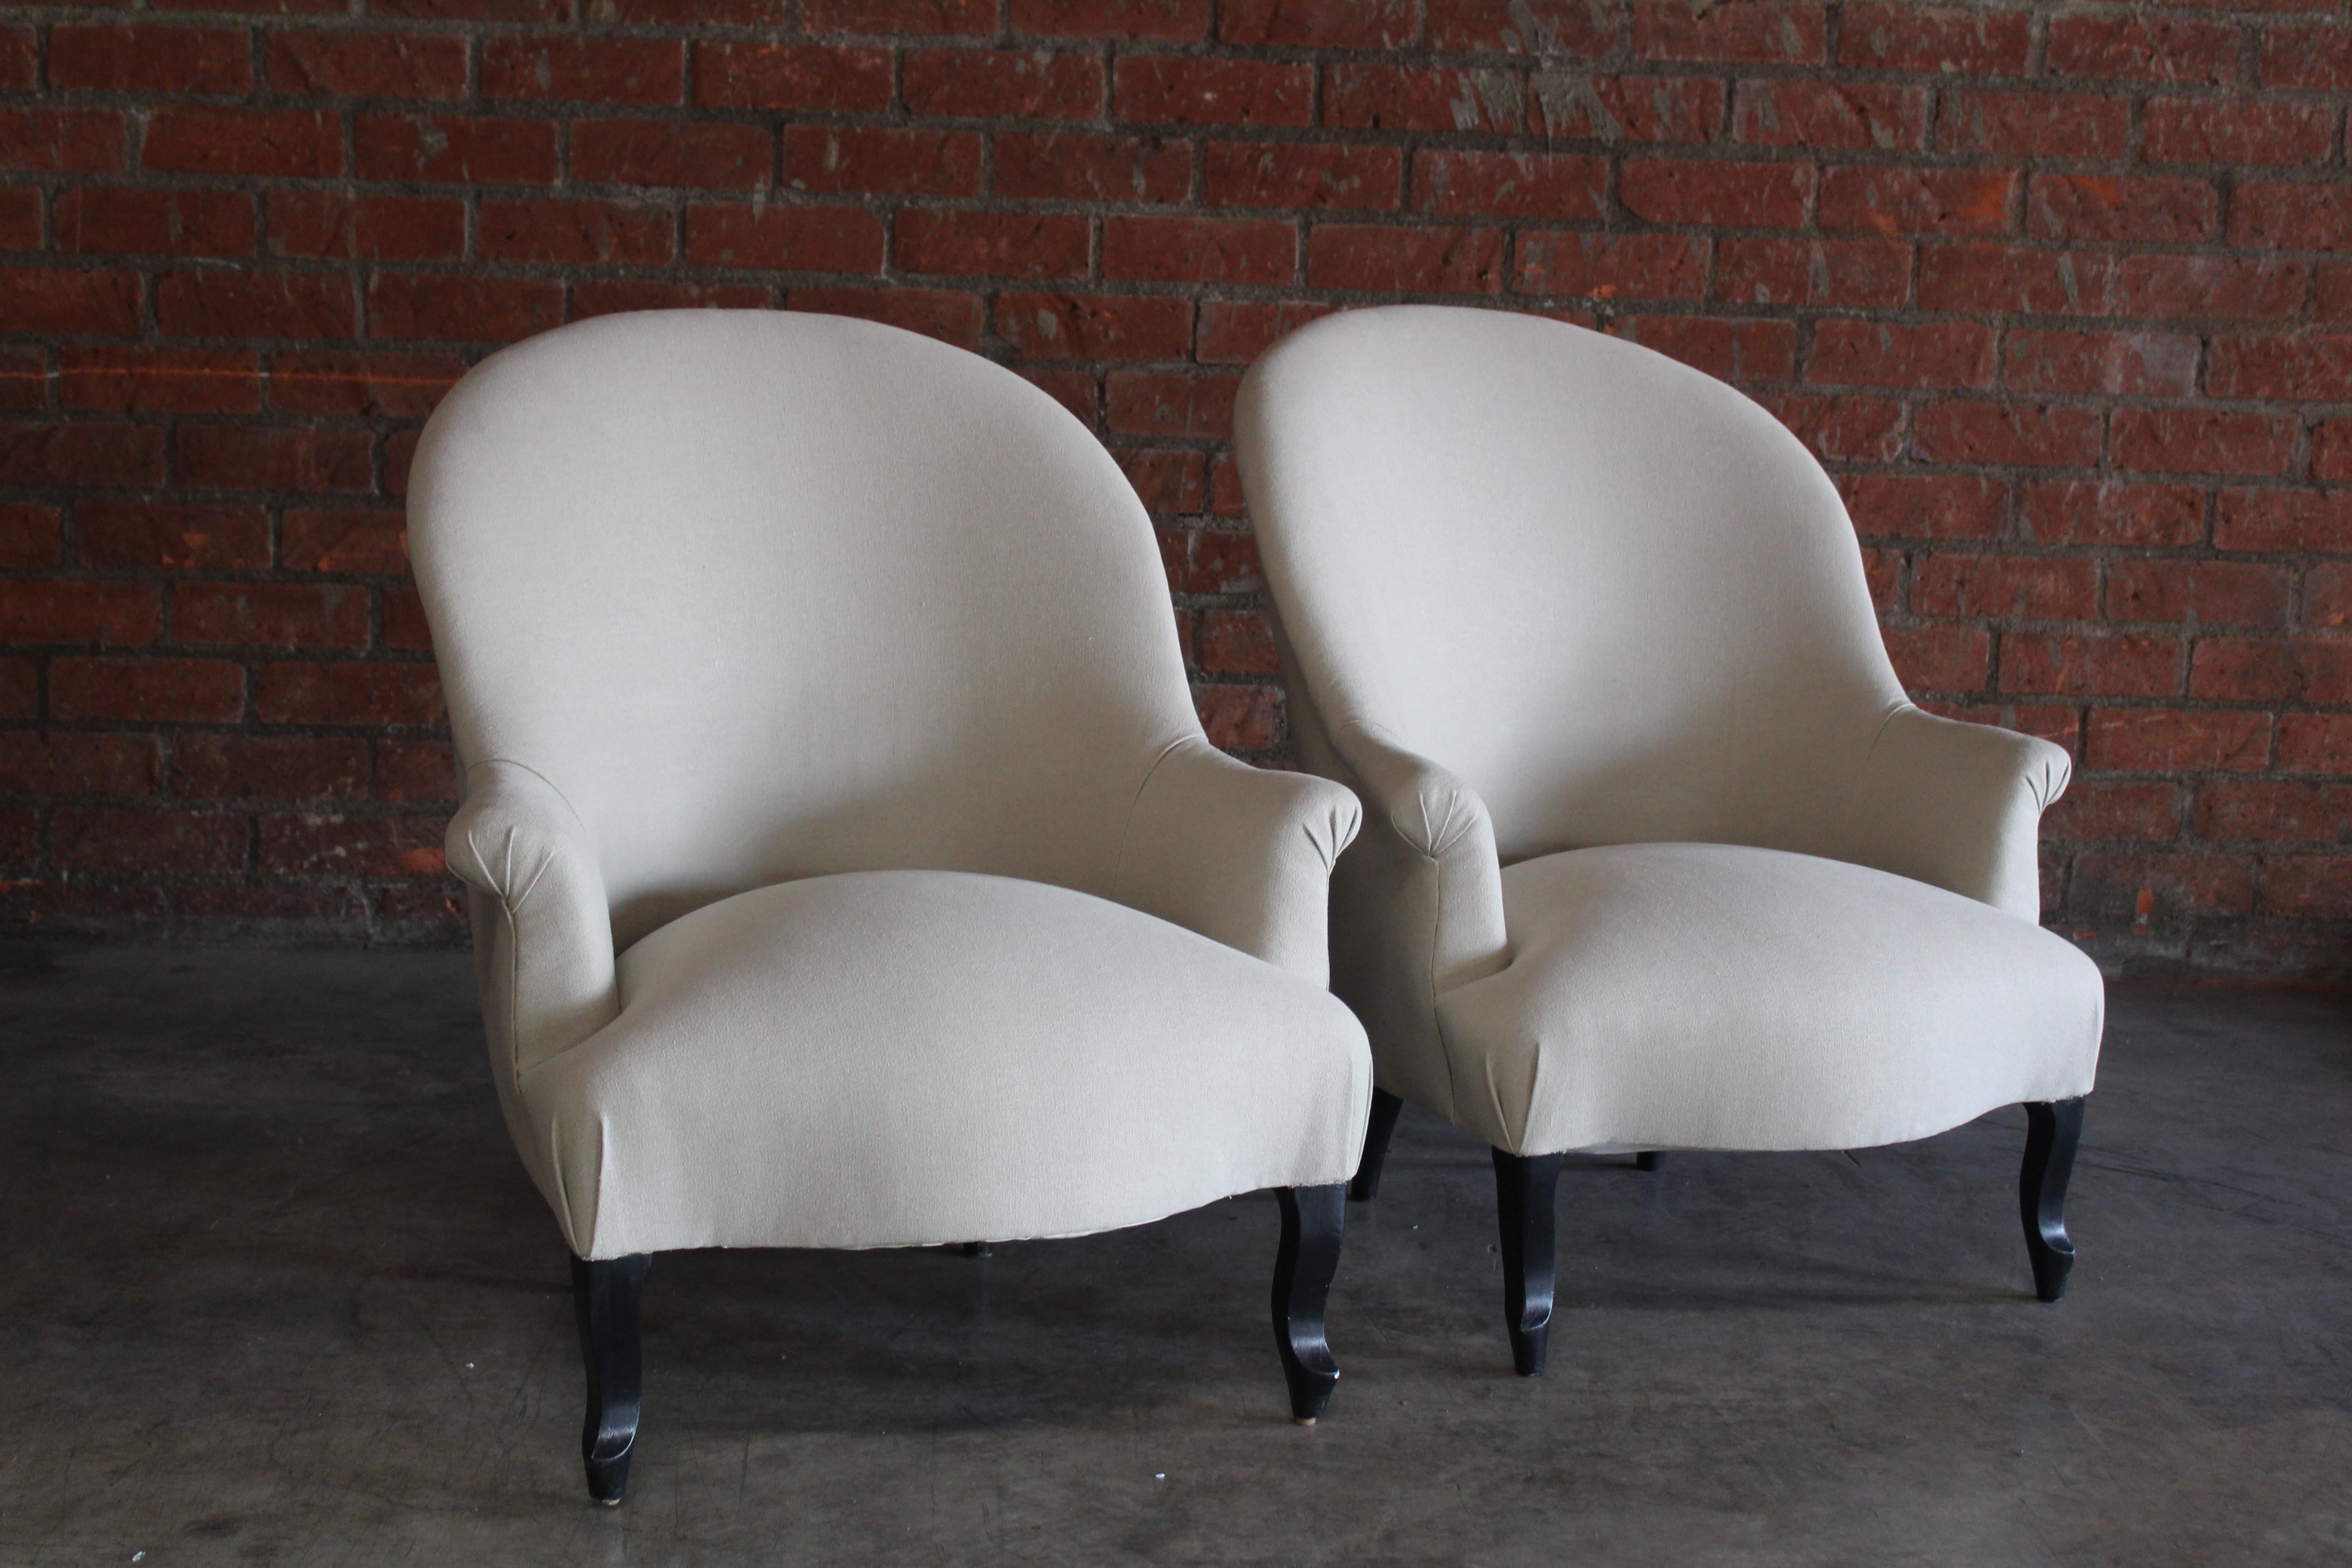 Pair of antique French Napoleon III lounge chairs, late 19th century. The pair have been reupholstered in a beige Belgian linen and restored with new foam and springs. The wooden legs are in their original finish and have been left as is which show